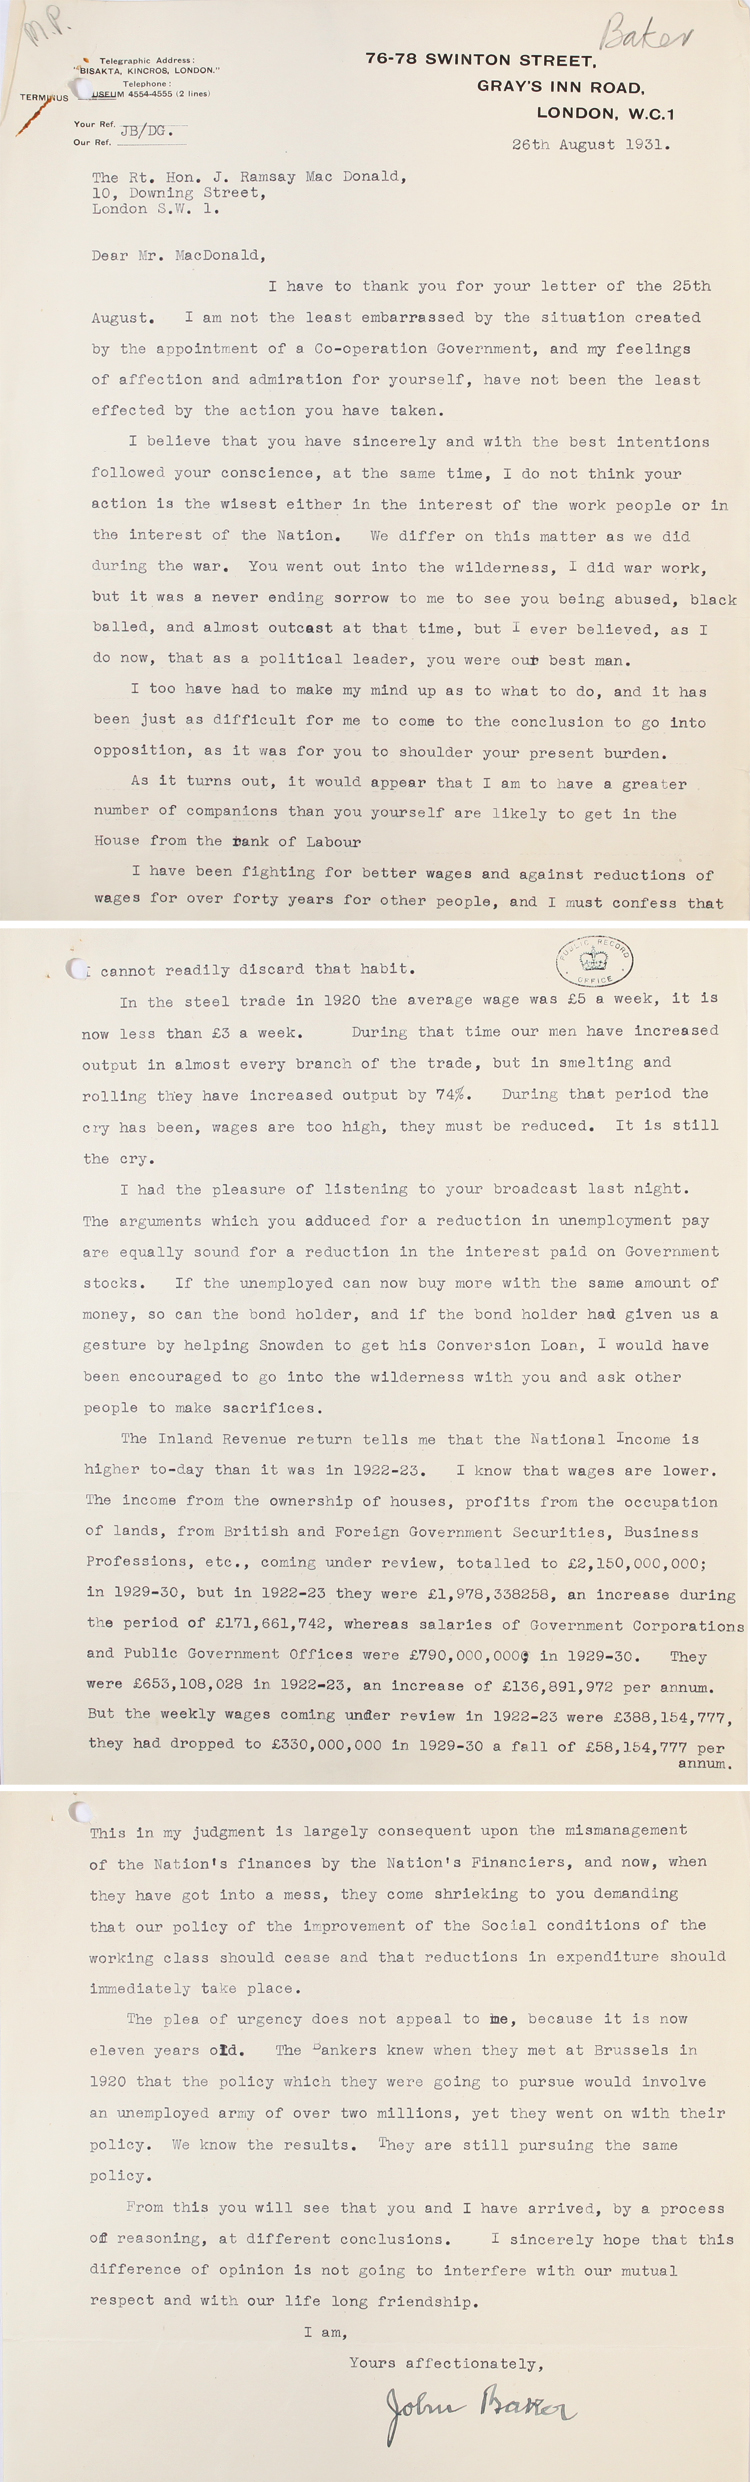 Letter from Labour MP John Baker to Prime Minister Ramsay MacDonald on the creation of the National Government, 26th August 1931 (PRO 30/69/1315)